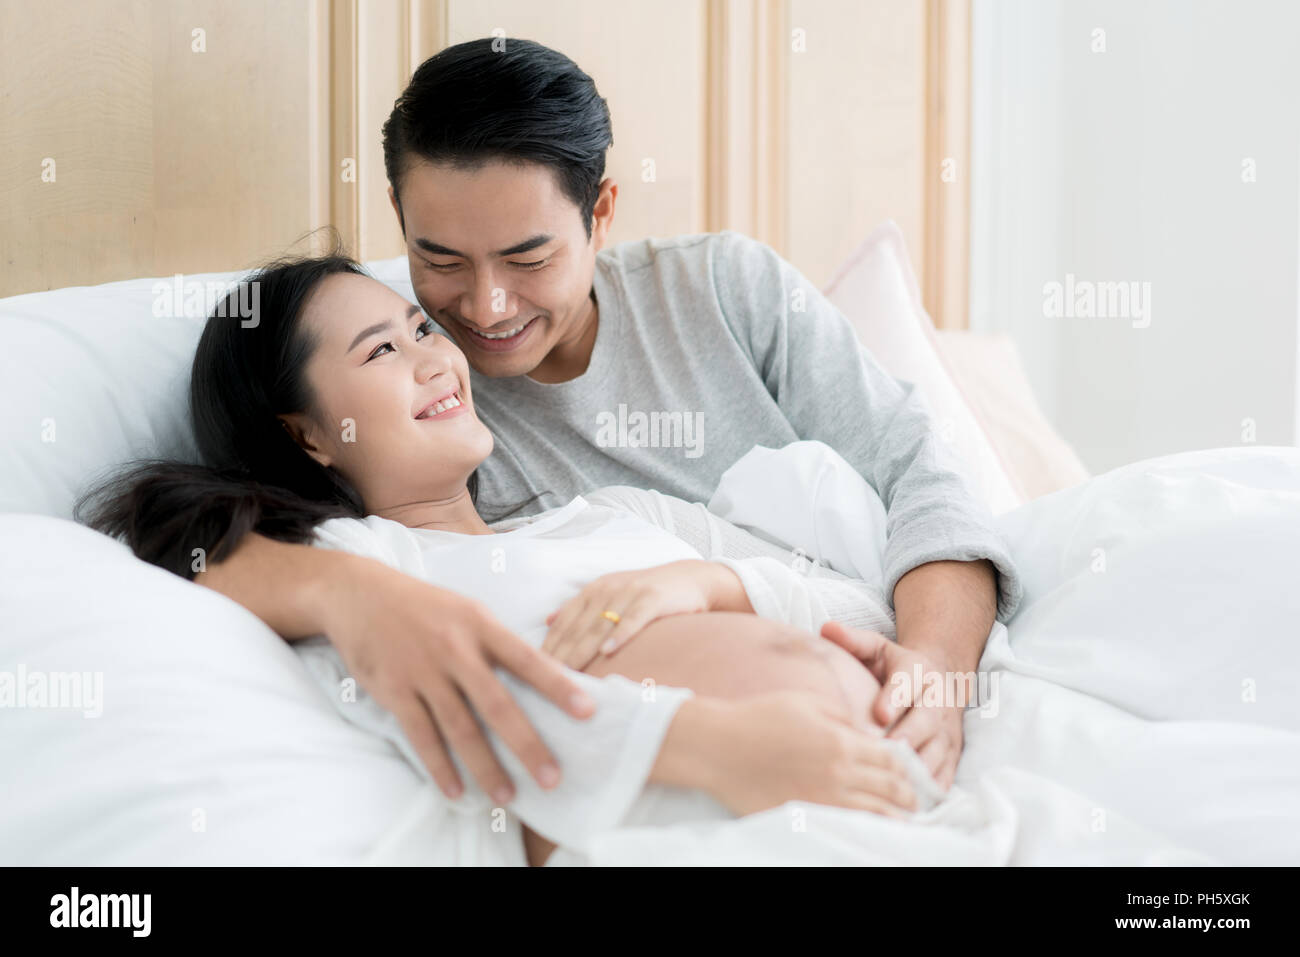 Handsome Asian man and his beautiful pregnant wife are hugging and smiling while lying in bed at home. Stock Photo